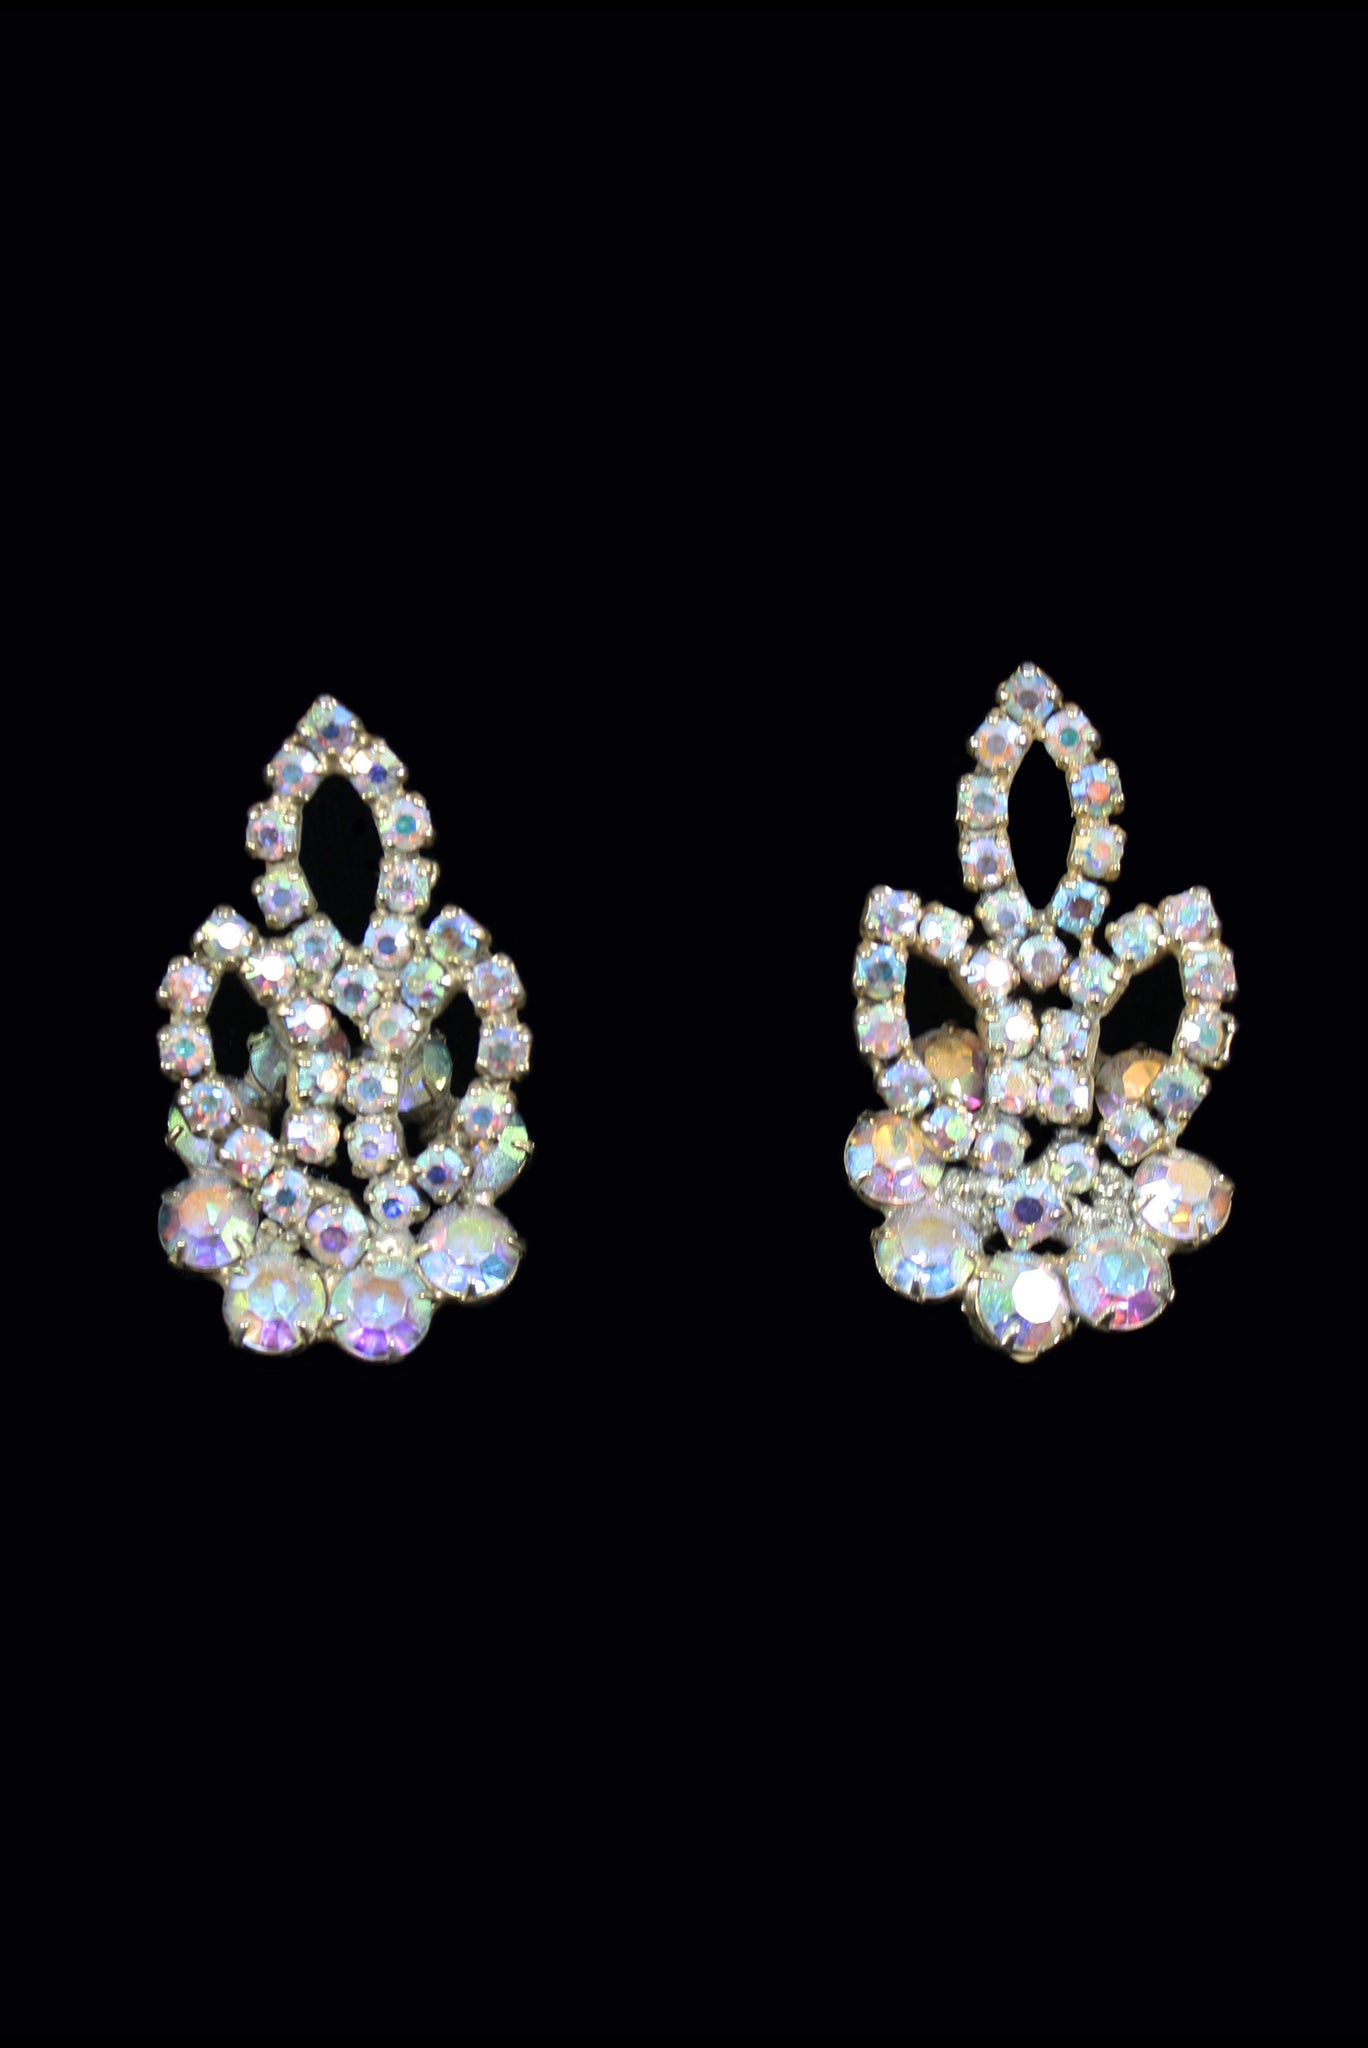 1950s Vintage Floral Iridescent Rhinestone Earrings by Madeleine